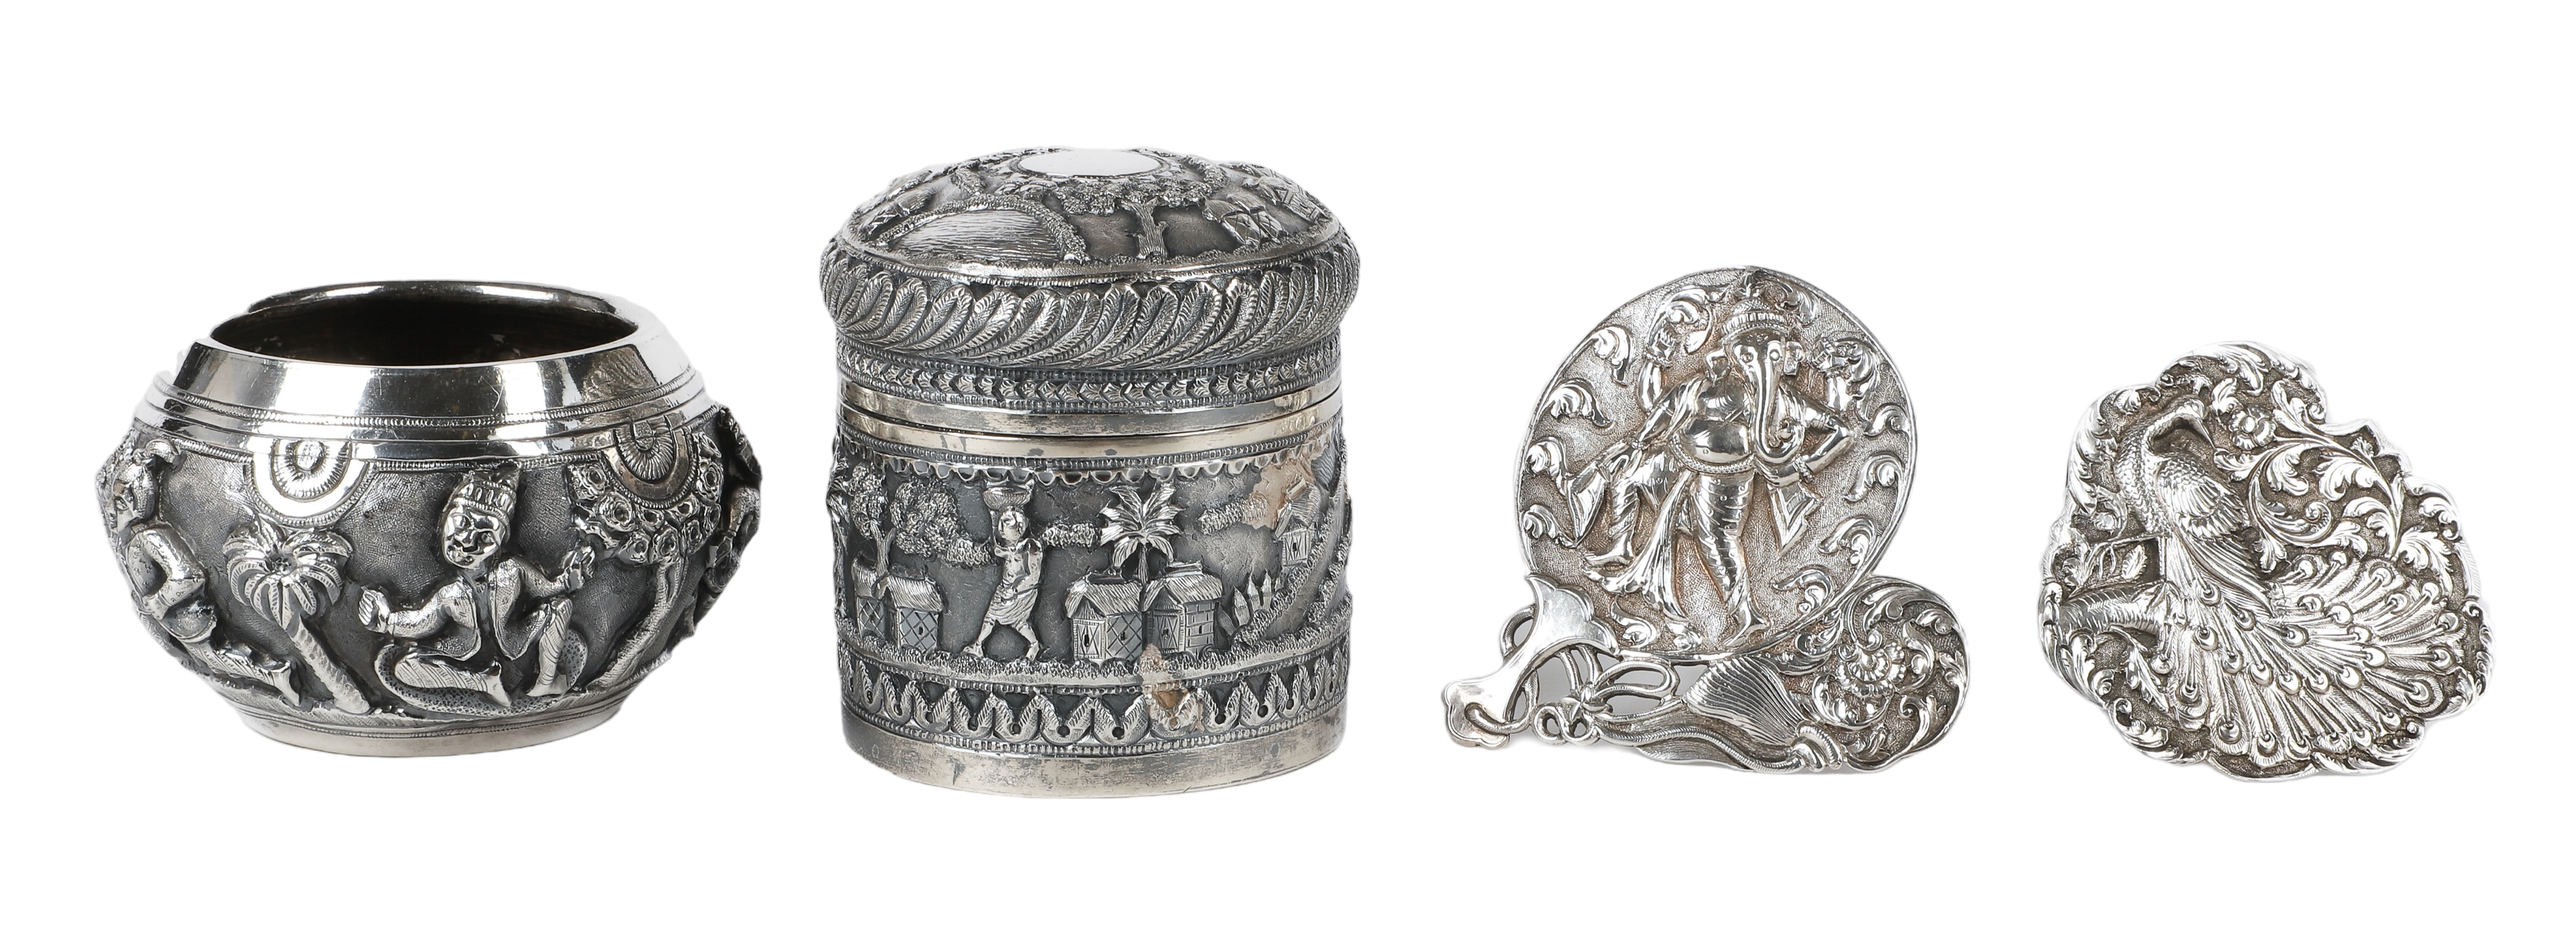  4 Pcs Colonial Indian kutch silver  309014